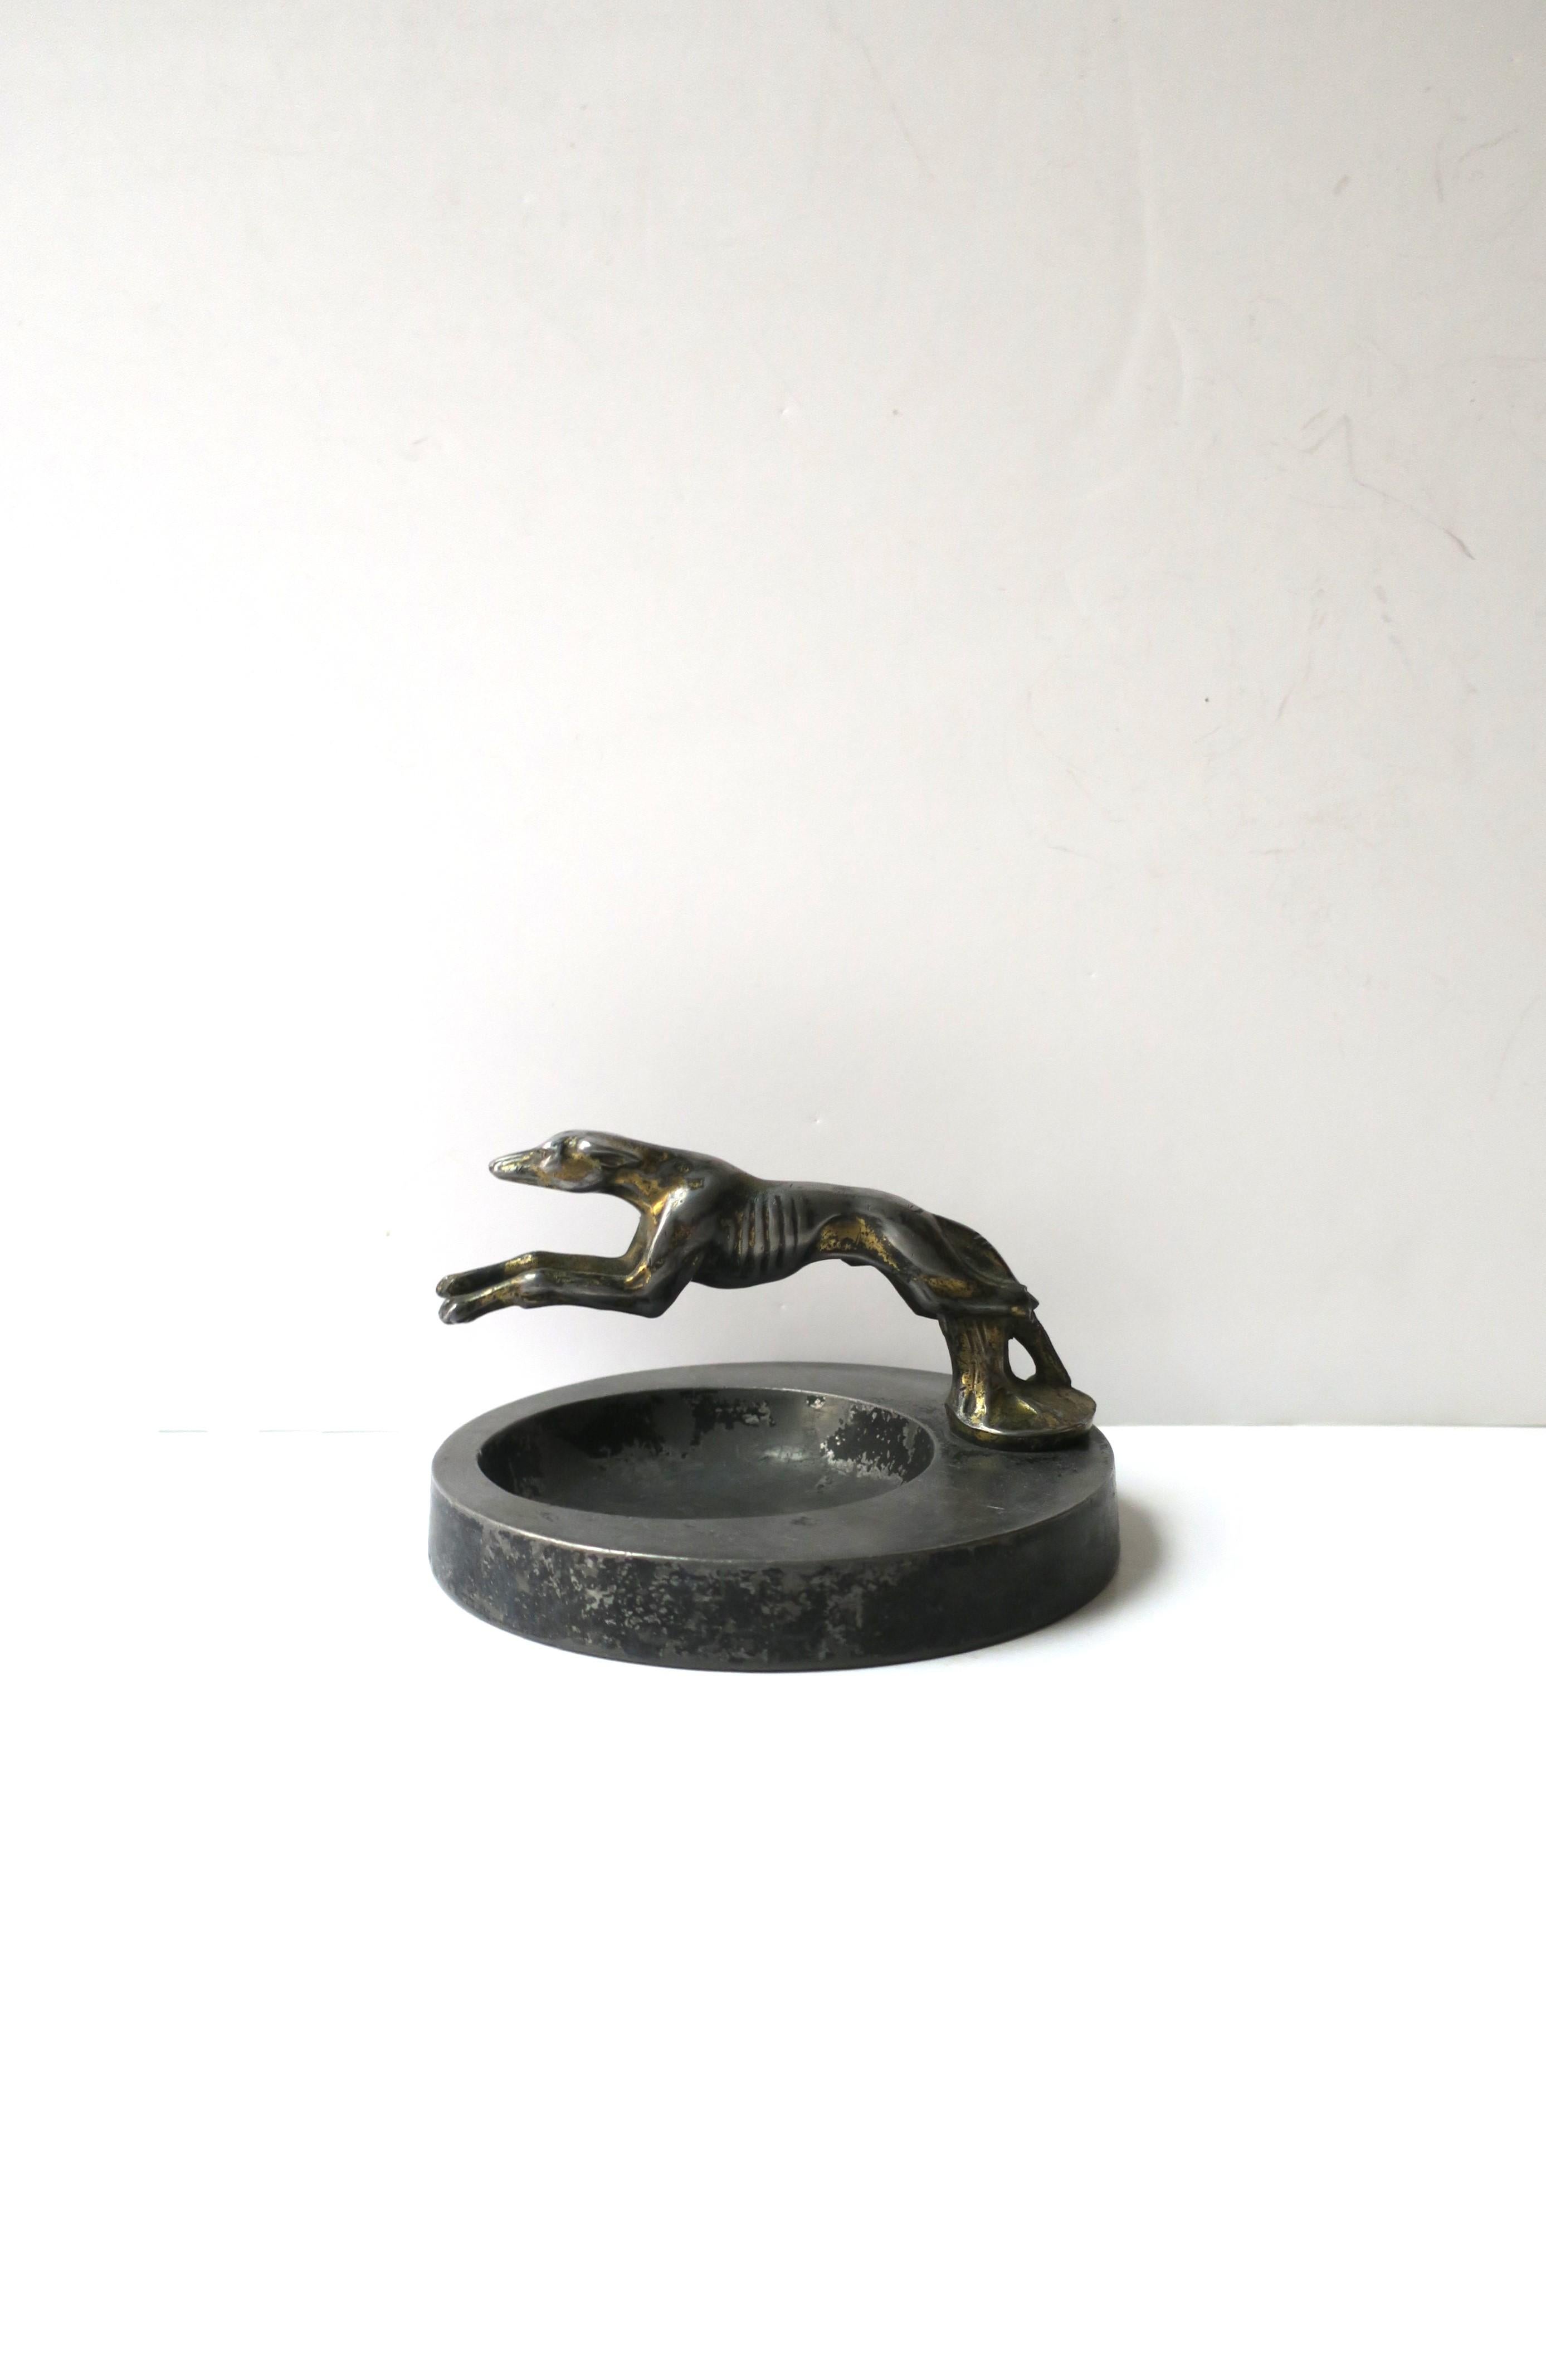 A substantial metal catchall vide-poche with greyhound whipped dog sculpture, Art Deco period, circa early-20th century. Base is round with 'running' cast greyhound whipped dog sculpture over top of catchall area. Dog moves 360 degrees as shown in